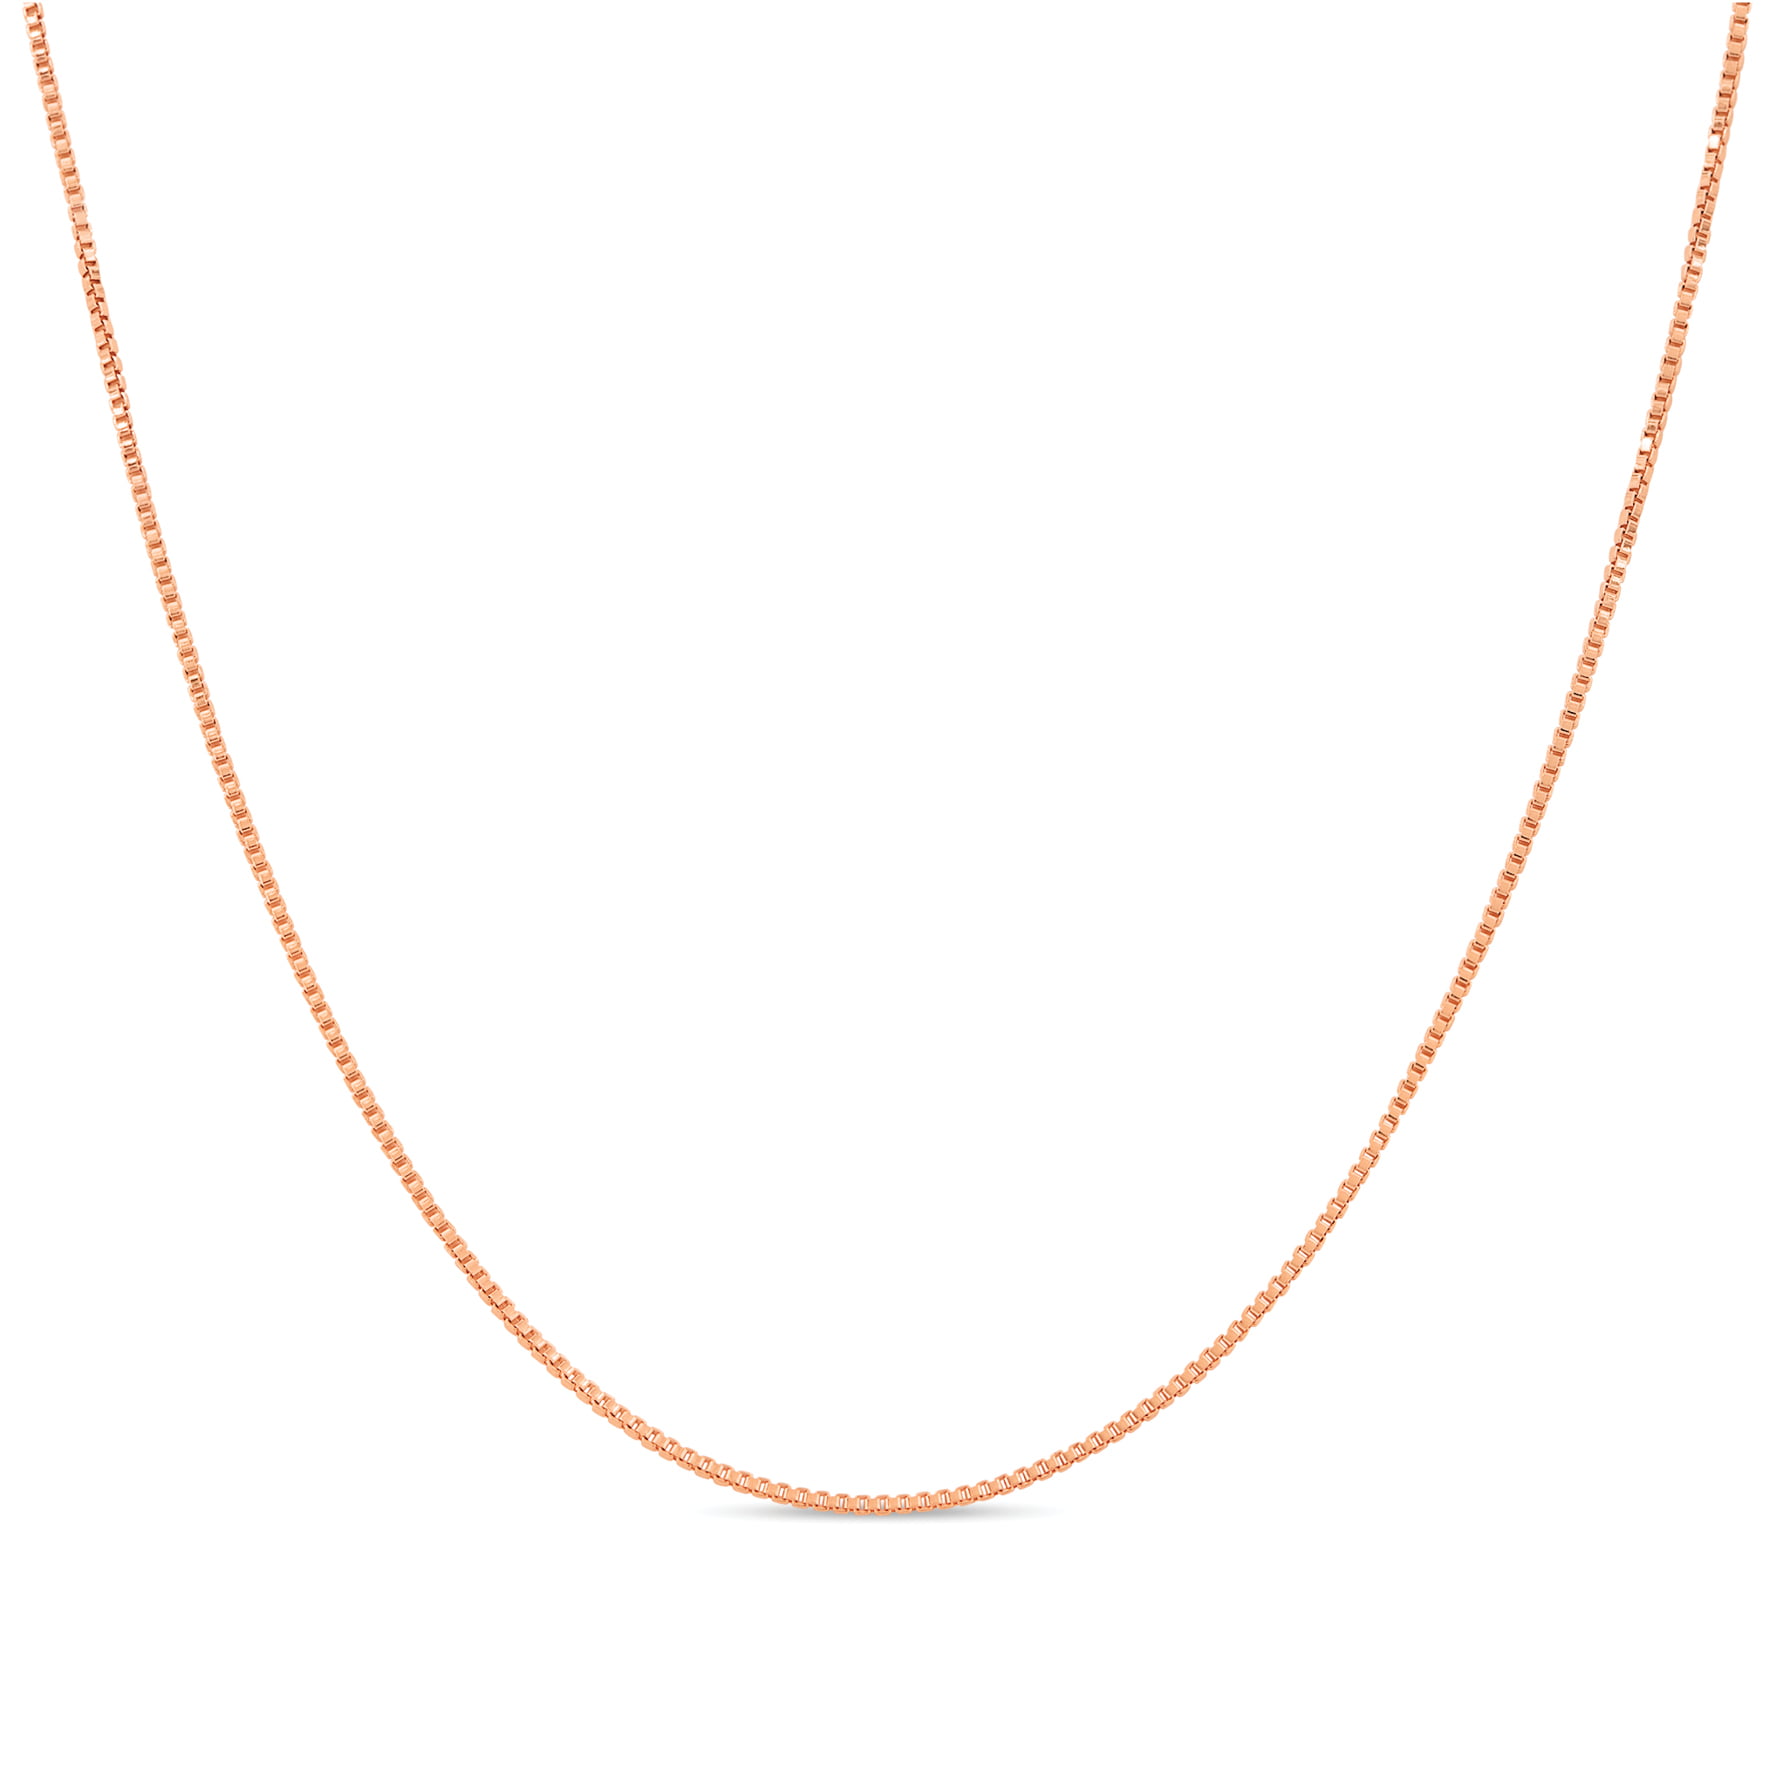 KEZEF Creations Sterling silver 1mm Box Chain Necklace Rose Gold Plated Silver Sizes 12-40 Made in Italy